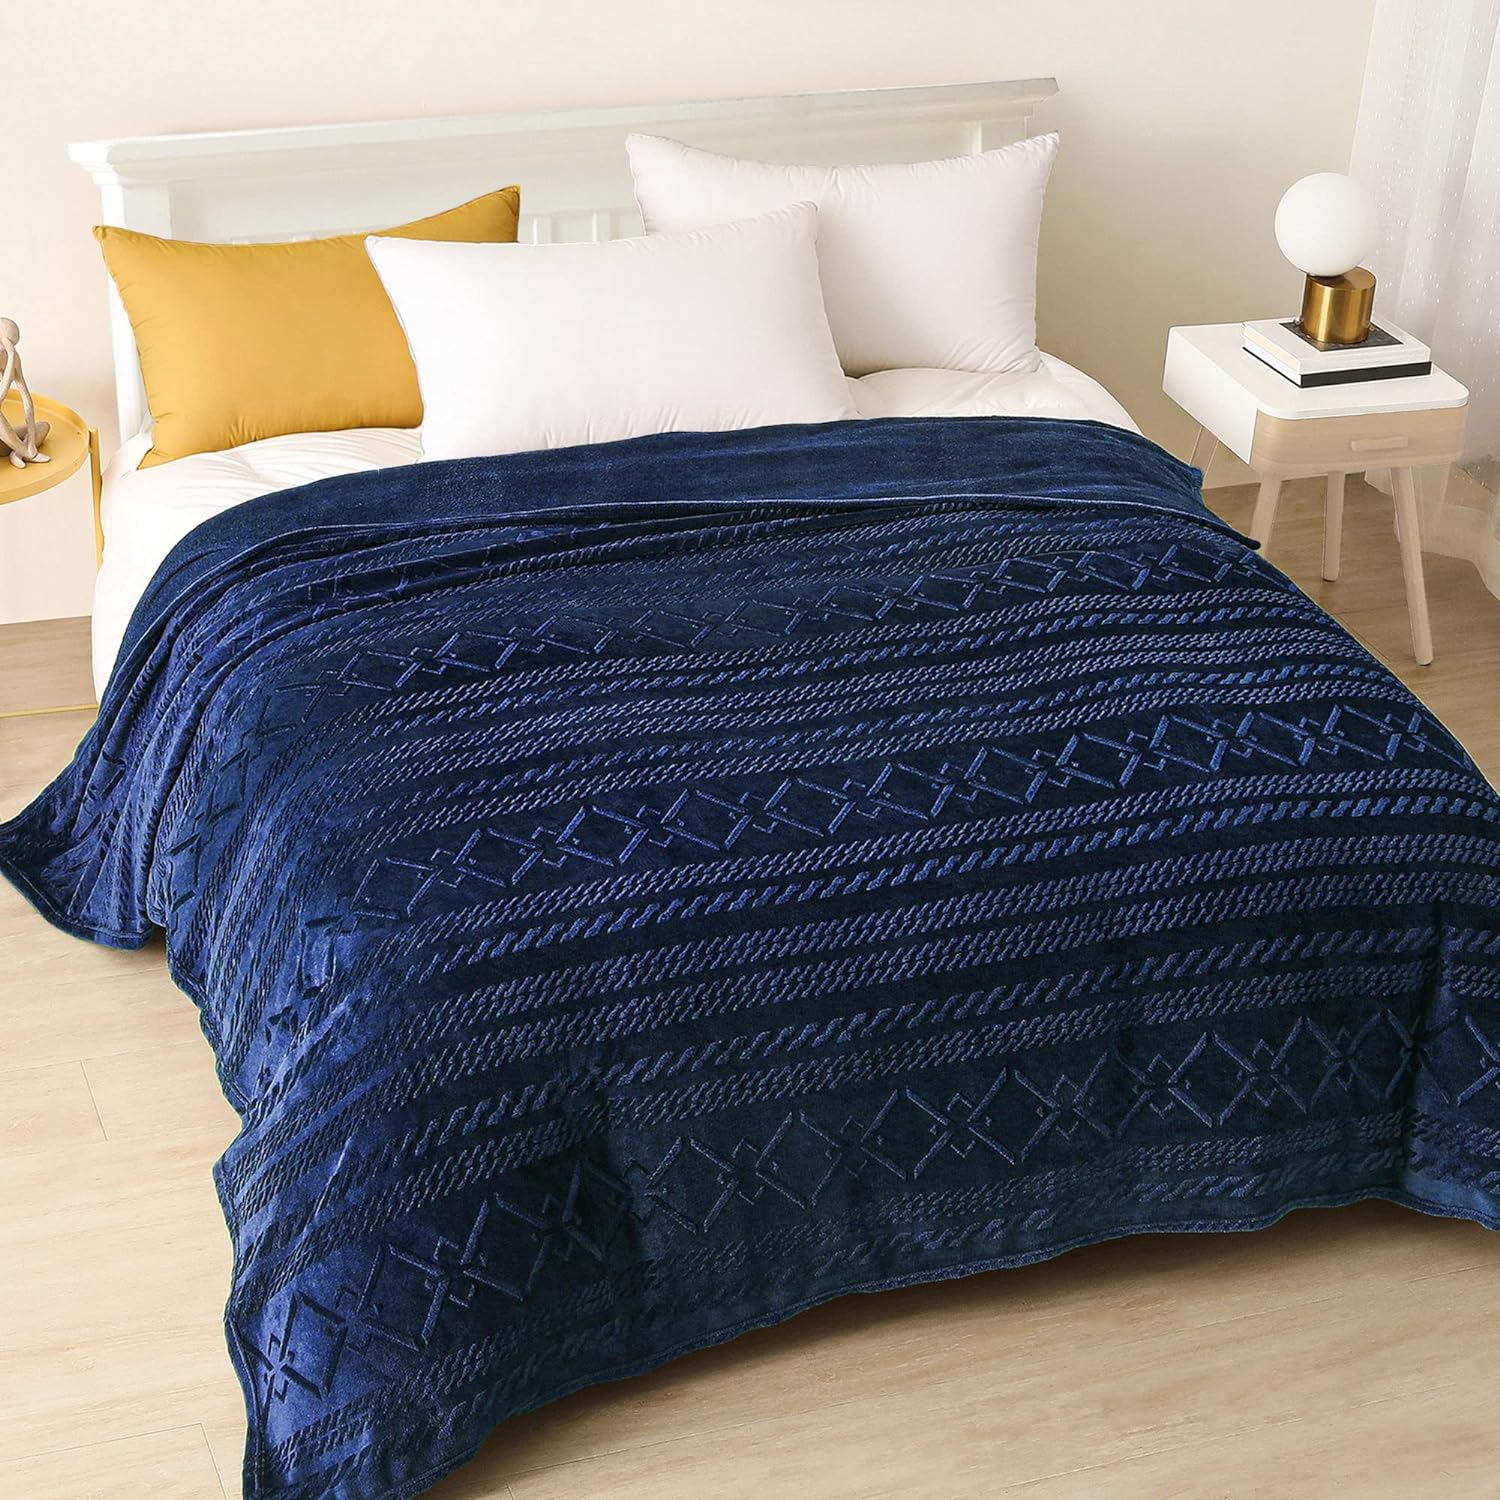 Exclusivo Mezcla Soft Queen Size Blanket, 90x90 Inches Warm and Cozy Bed Blankets, Decorative Geometry Pattern Plush Blankets for Winter, Navy Blue Blanket